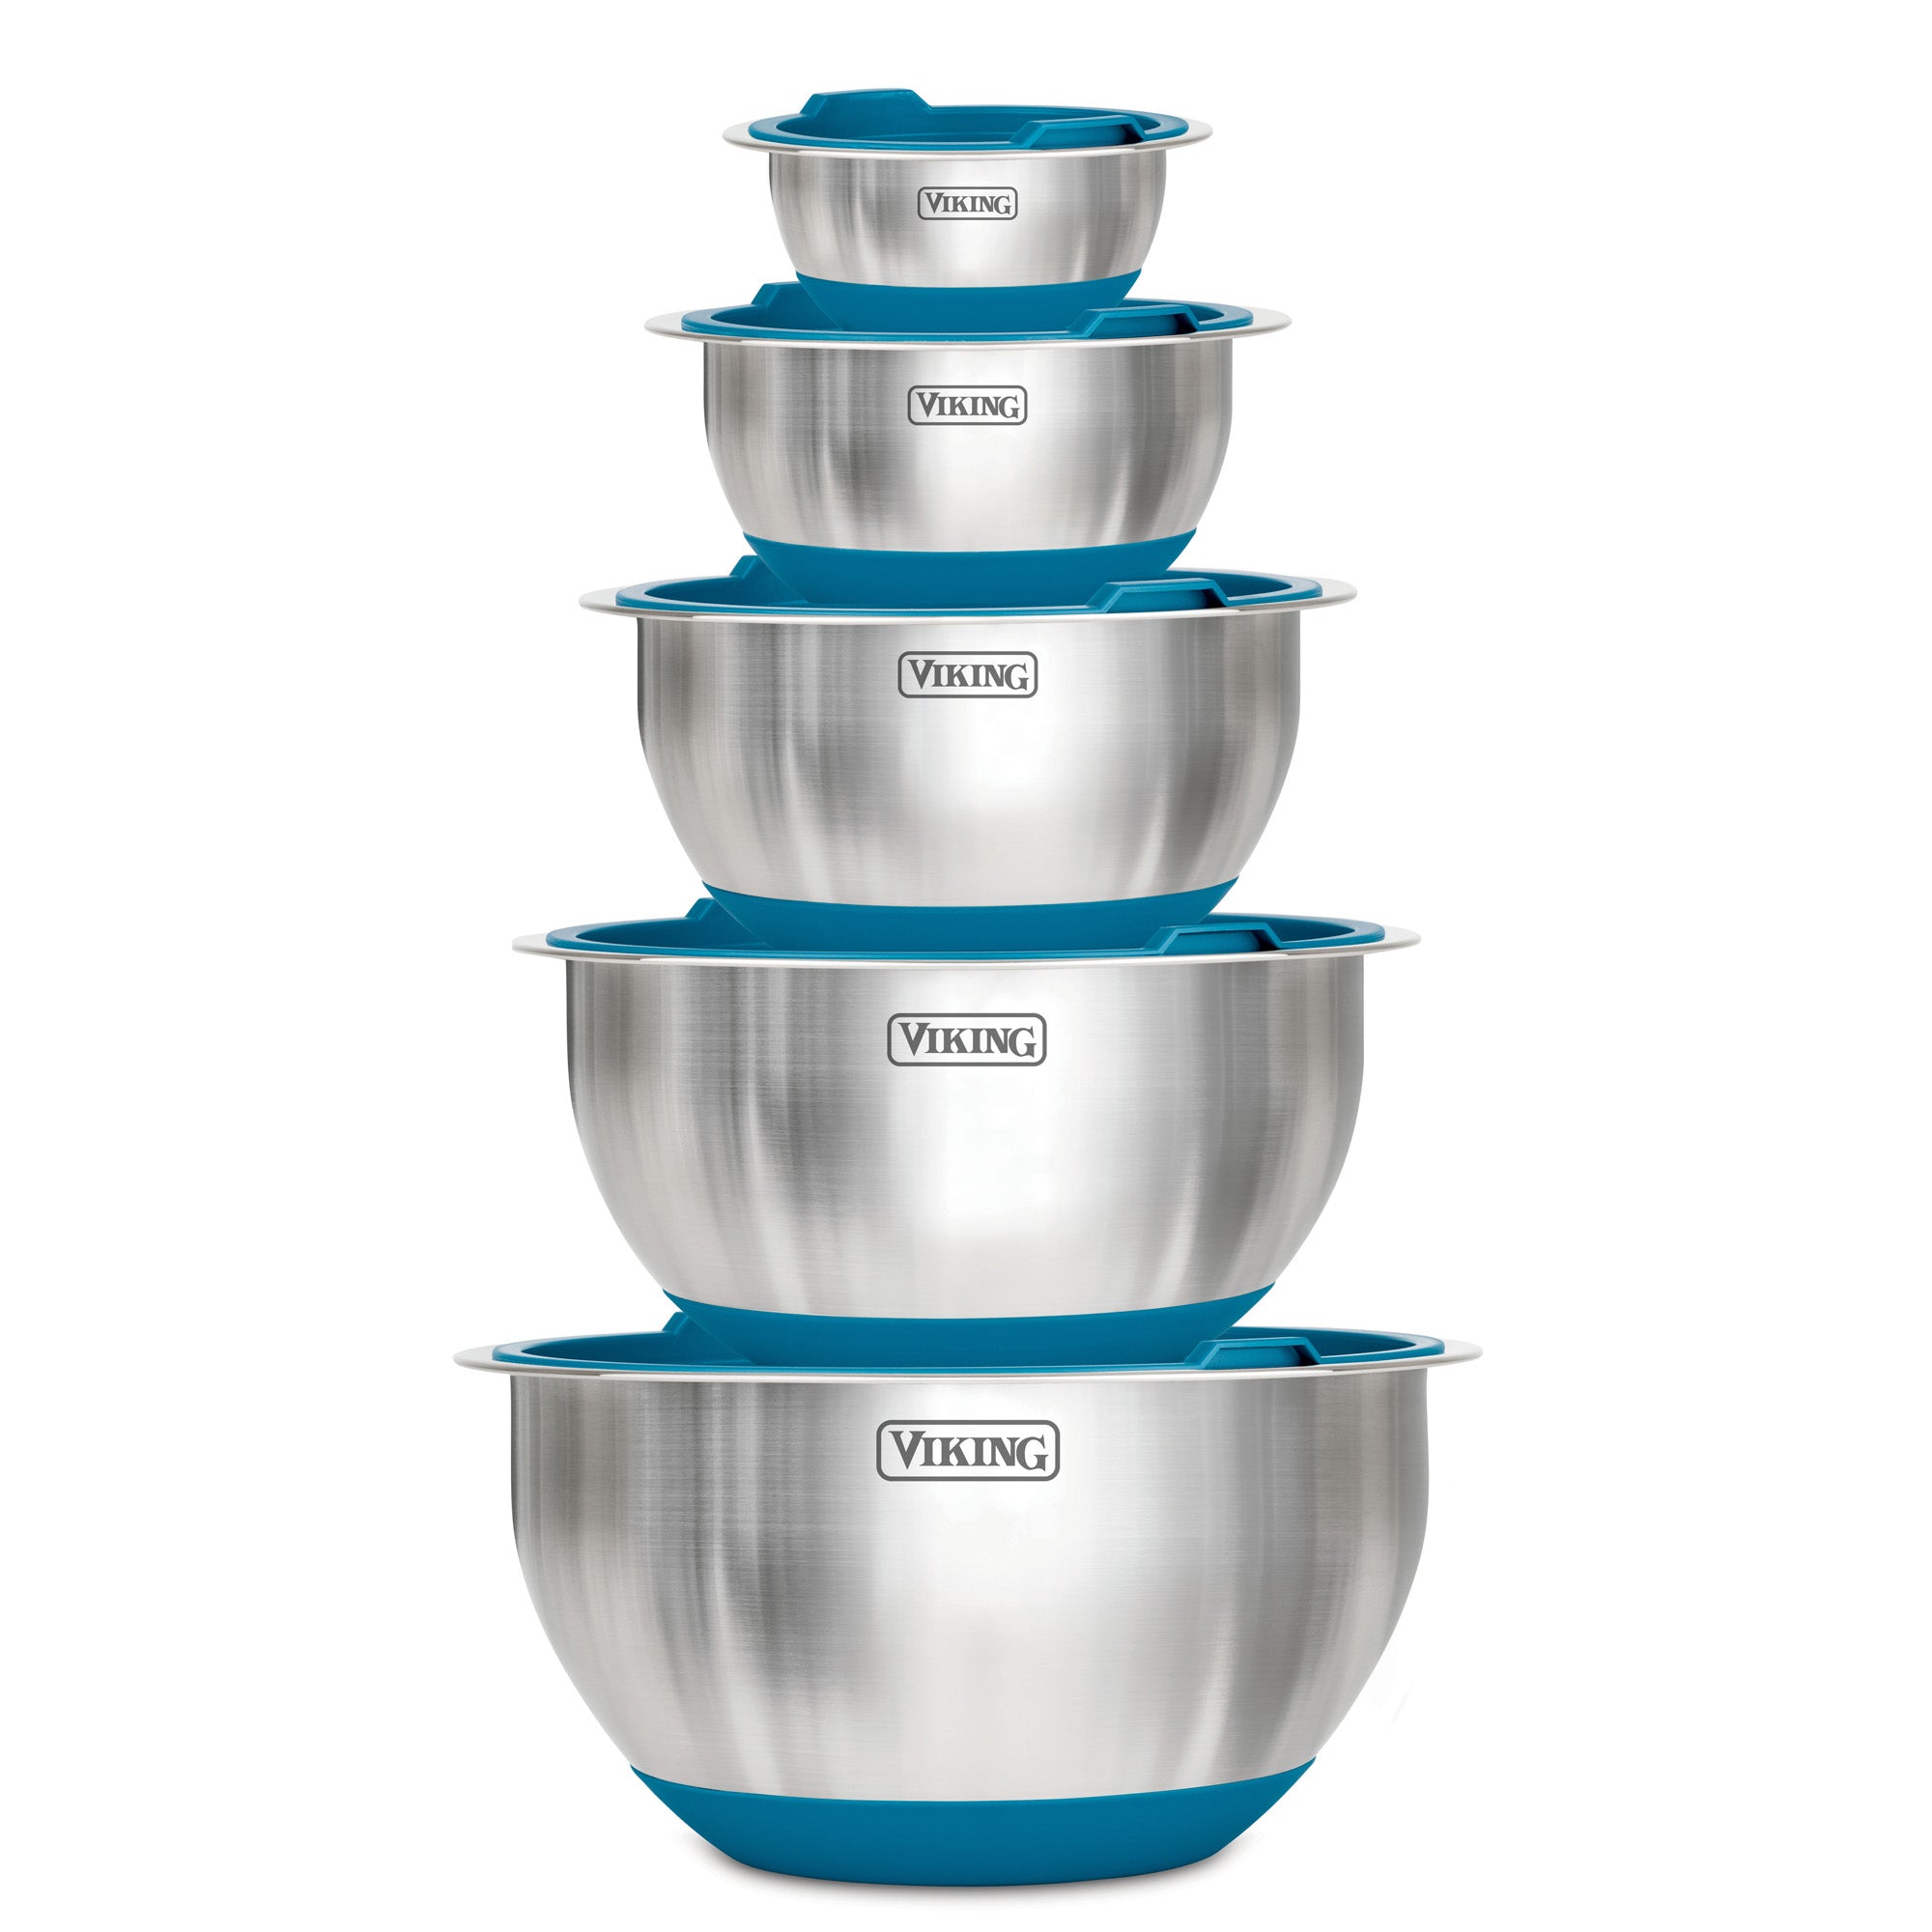 Viking 10-Piece Stainless Steel Mixing Bowl Set with Lids, Teal